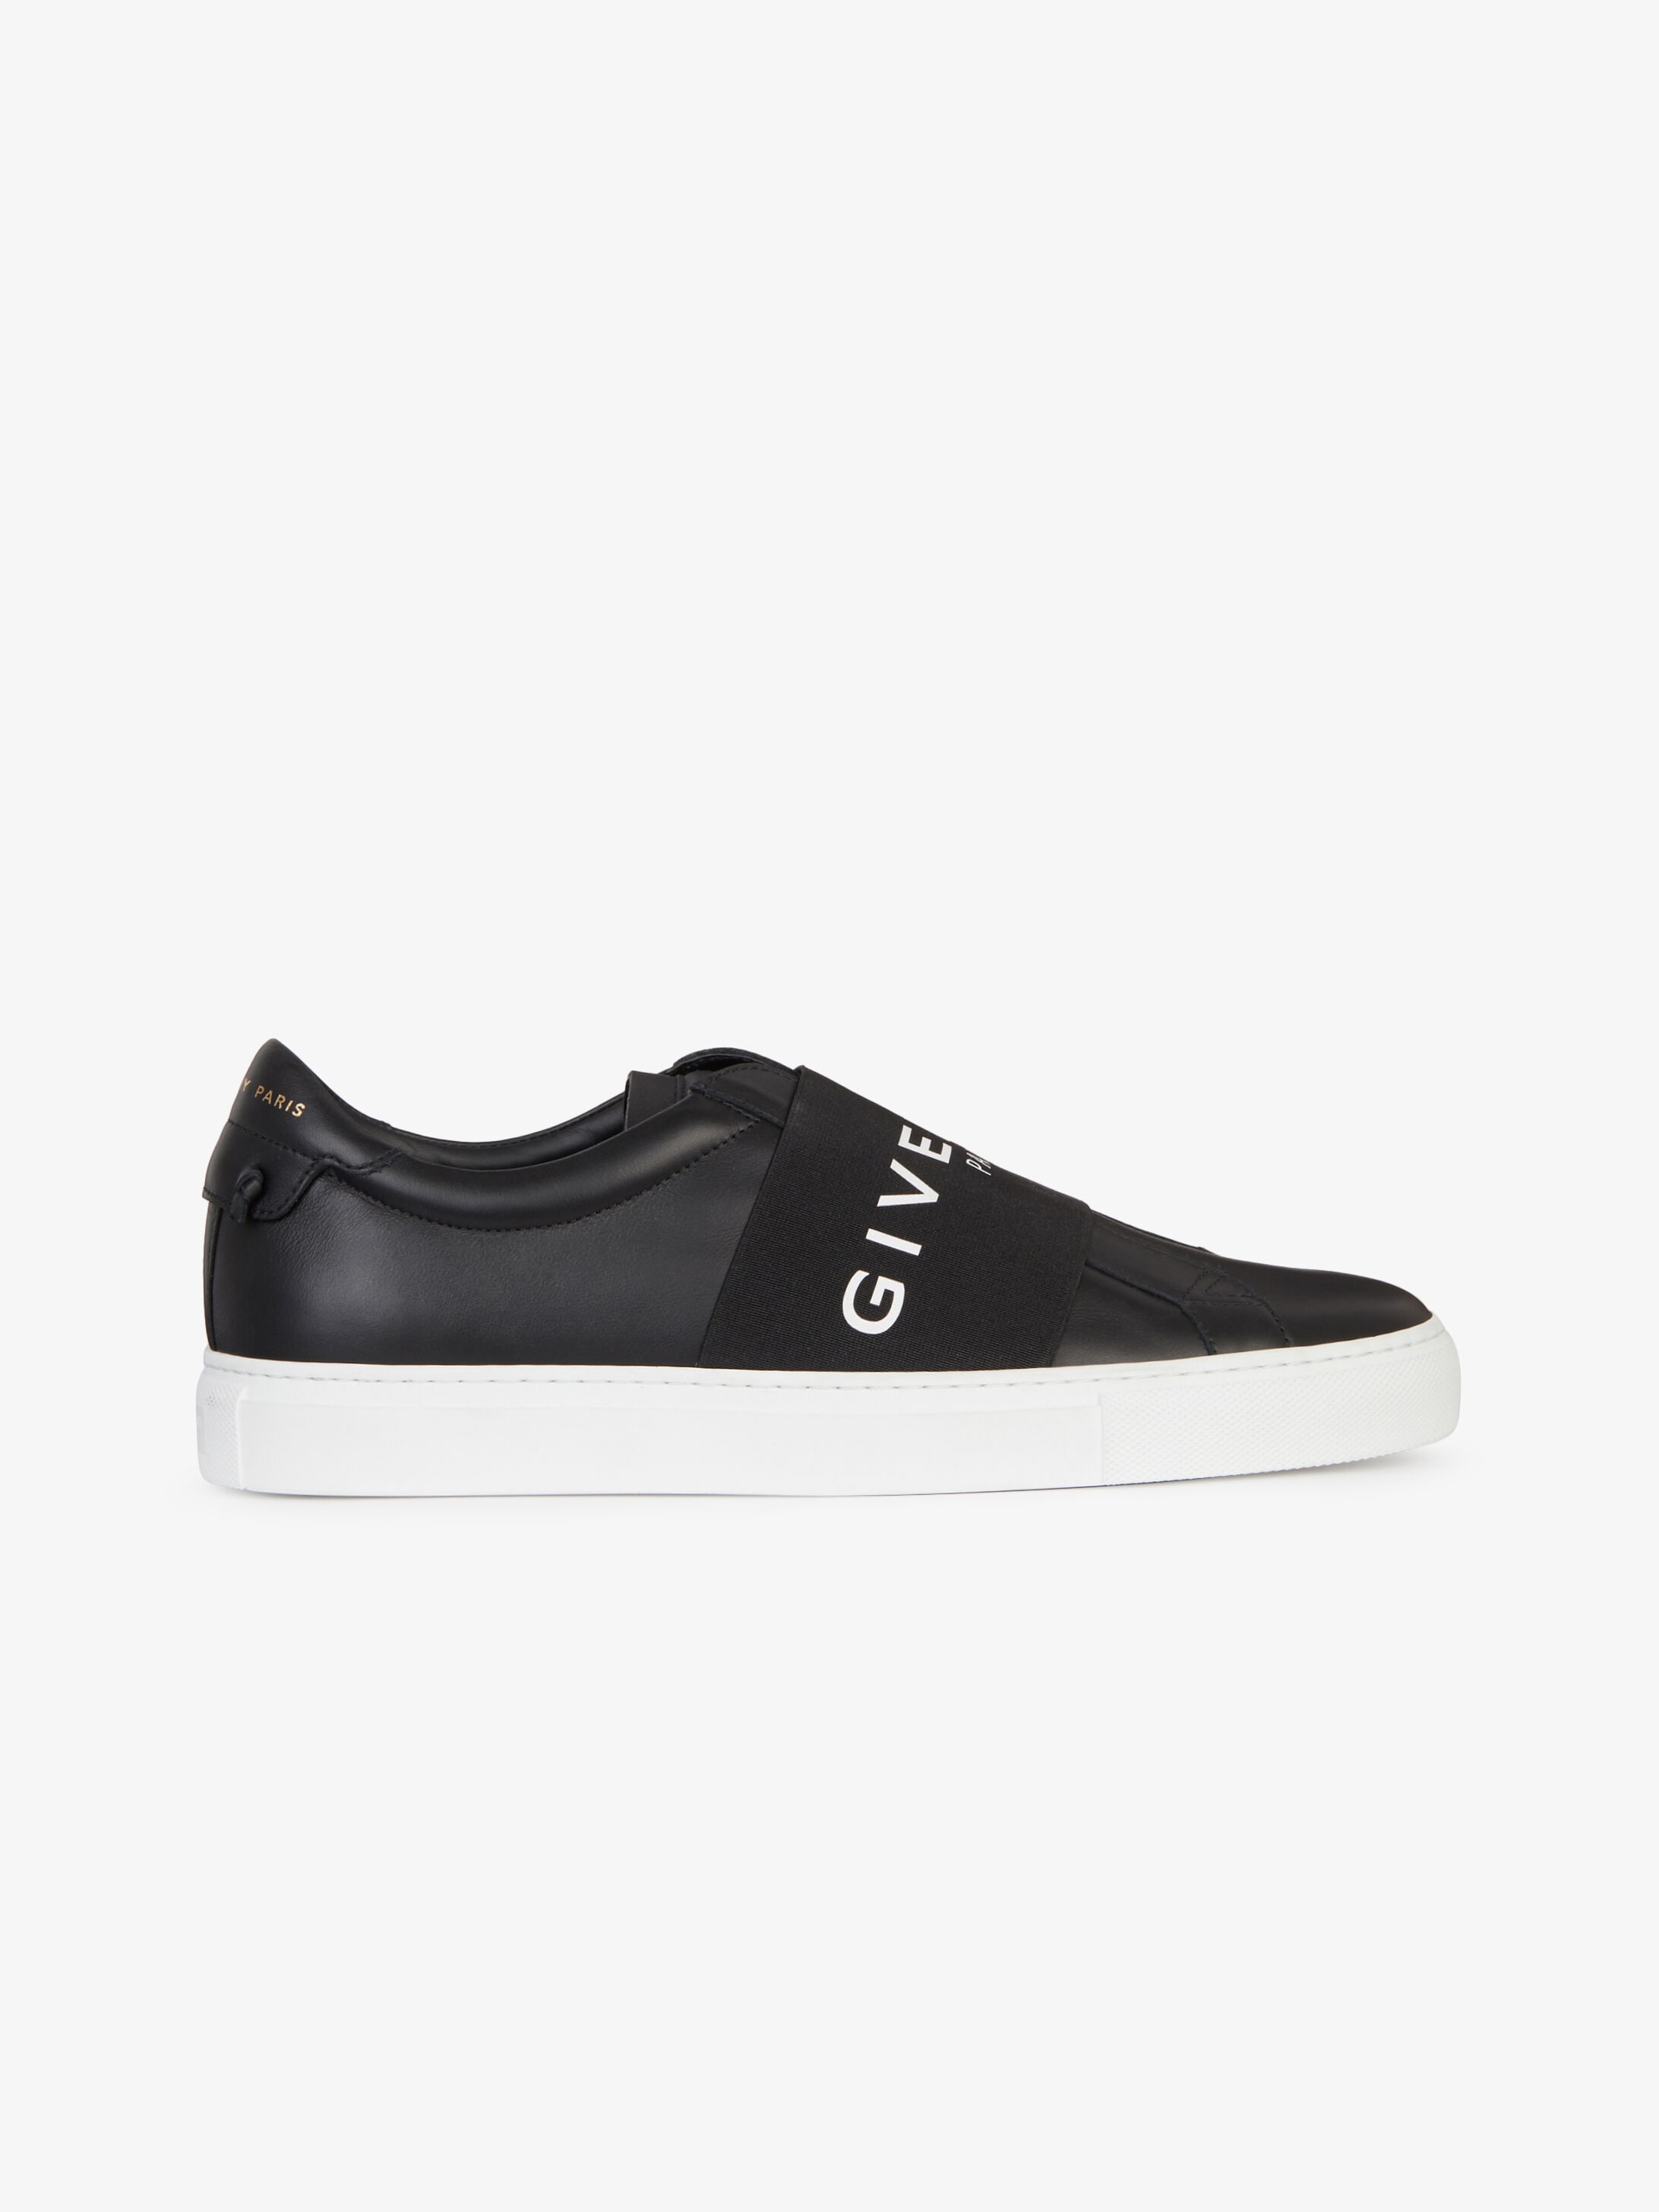 black and white givenchy shoes